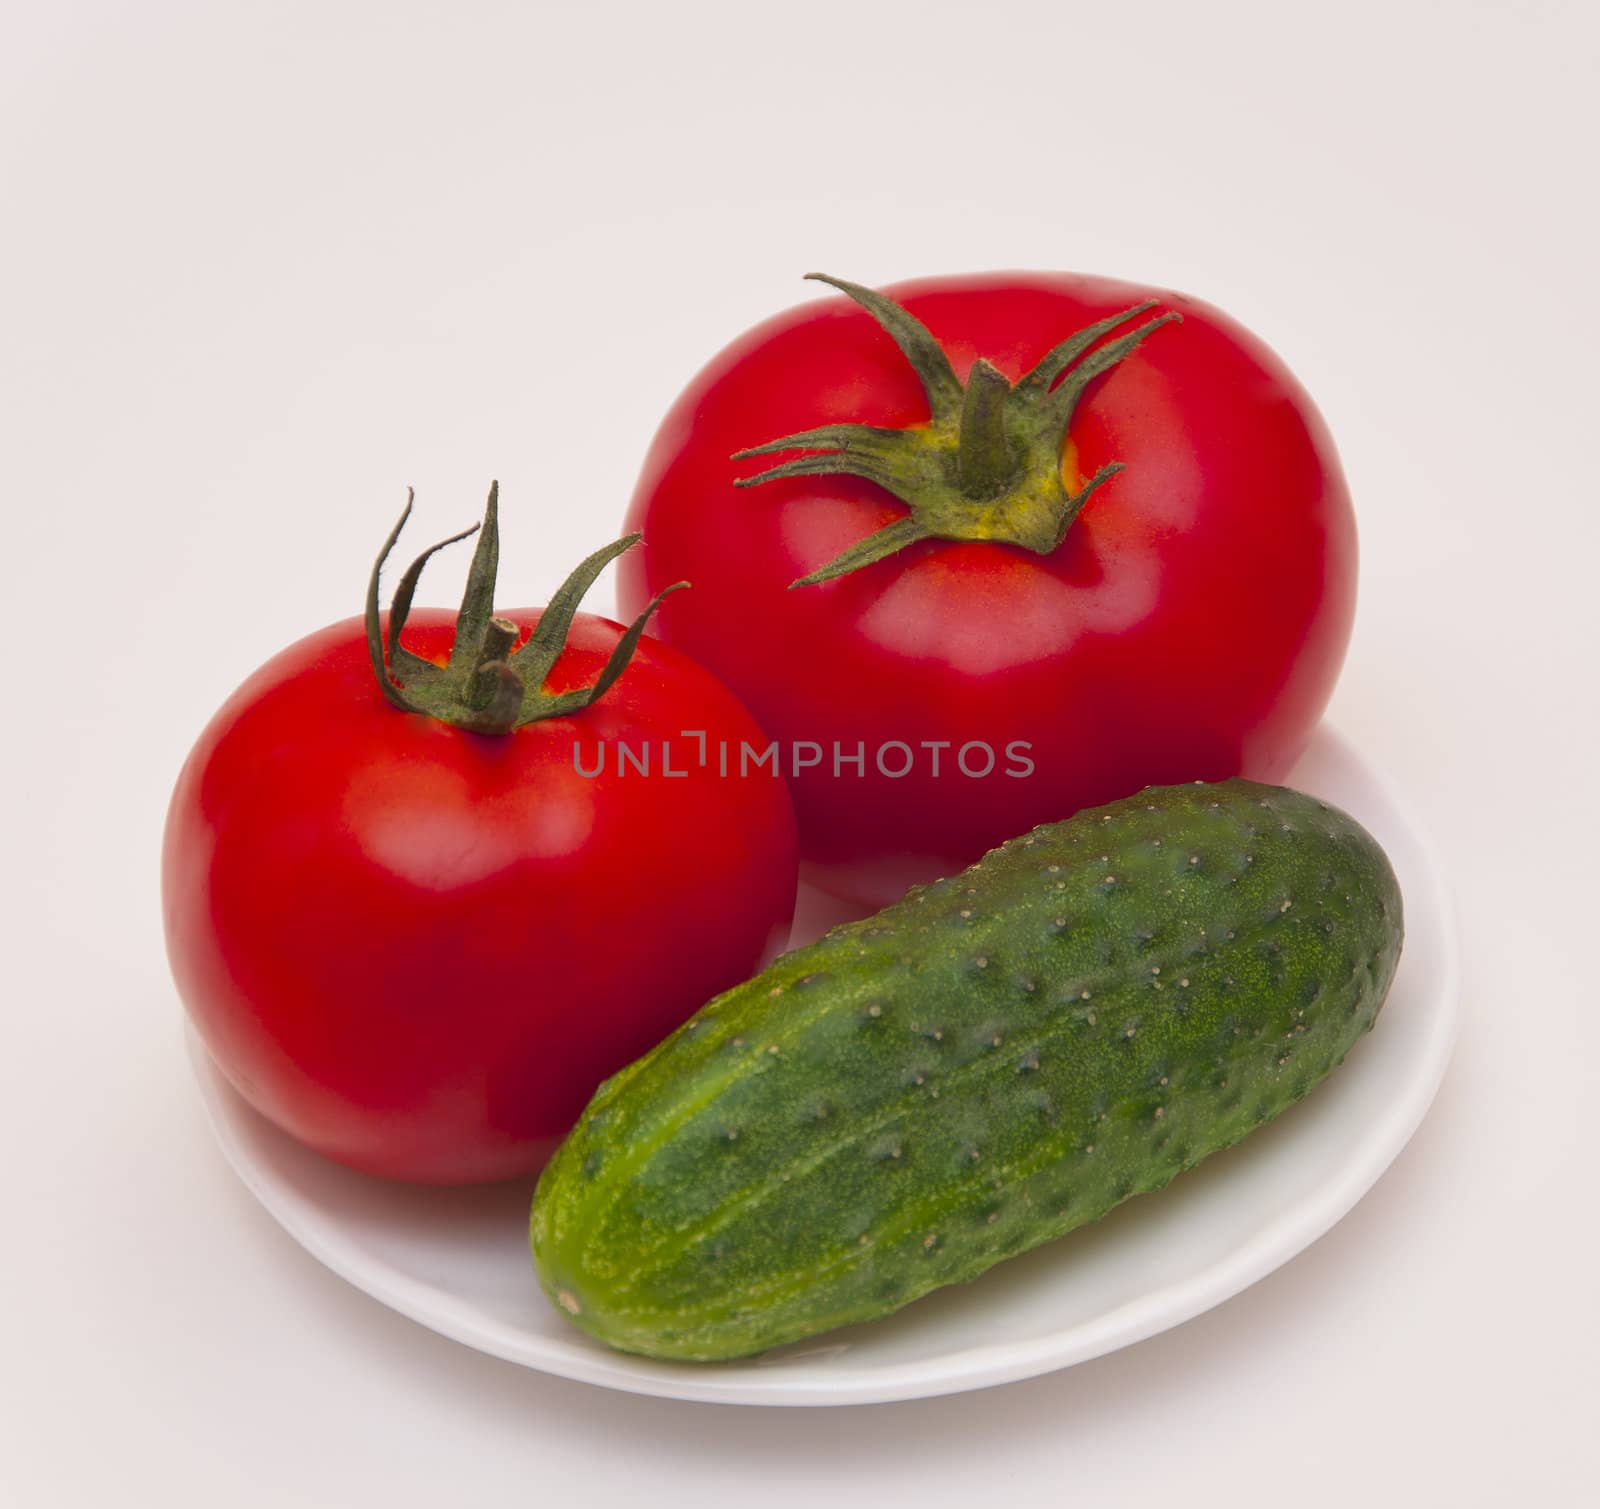 Cucumber with tomato.jpg by inxti